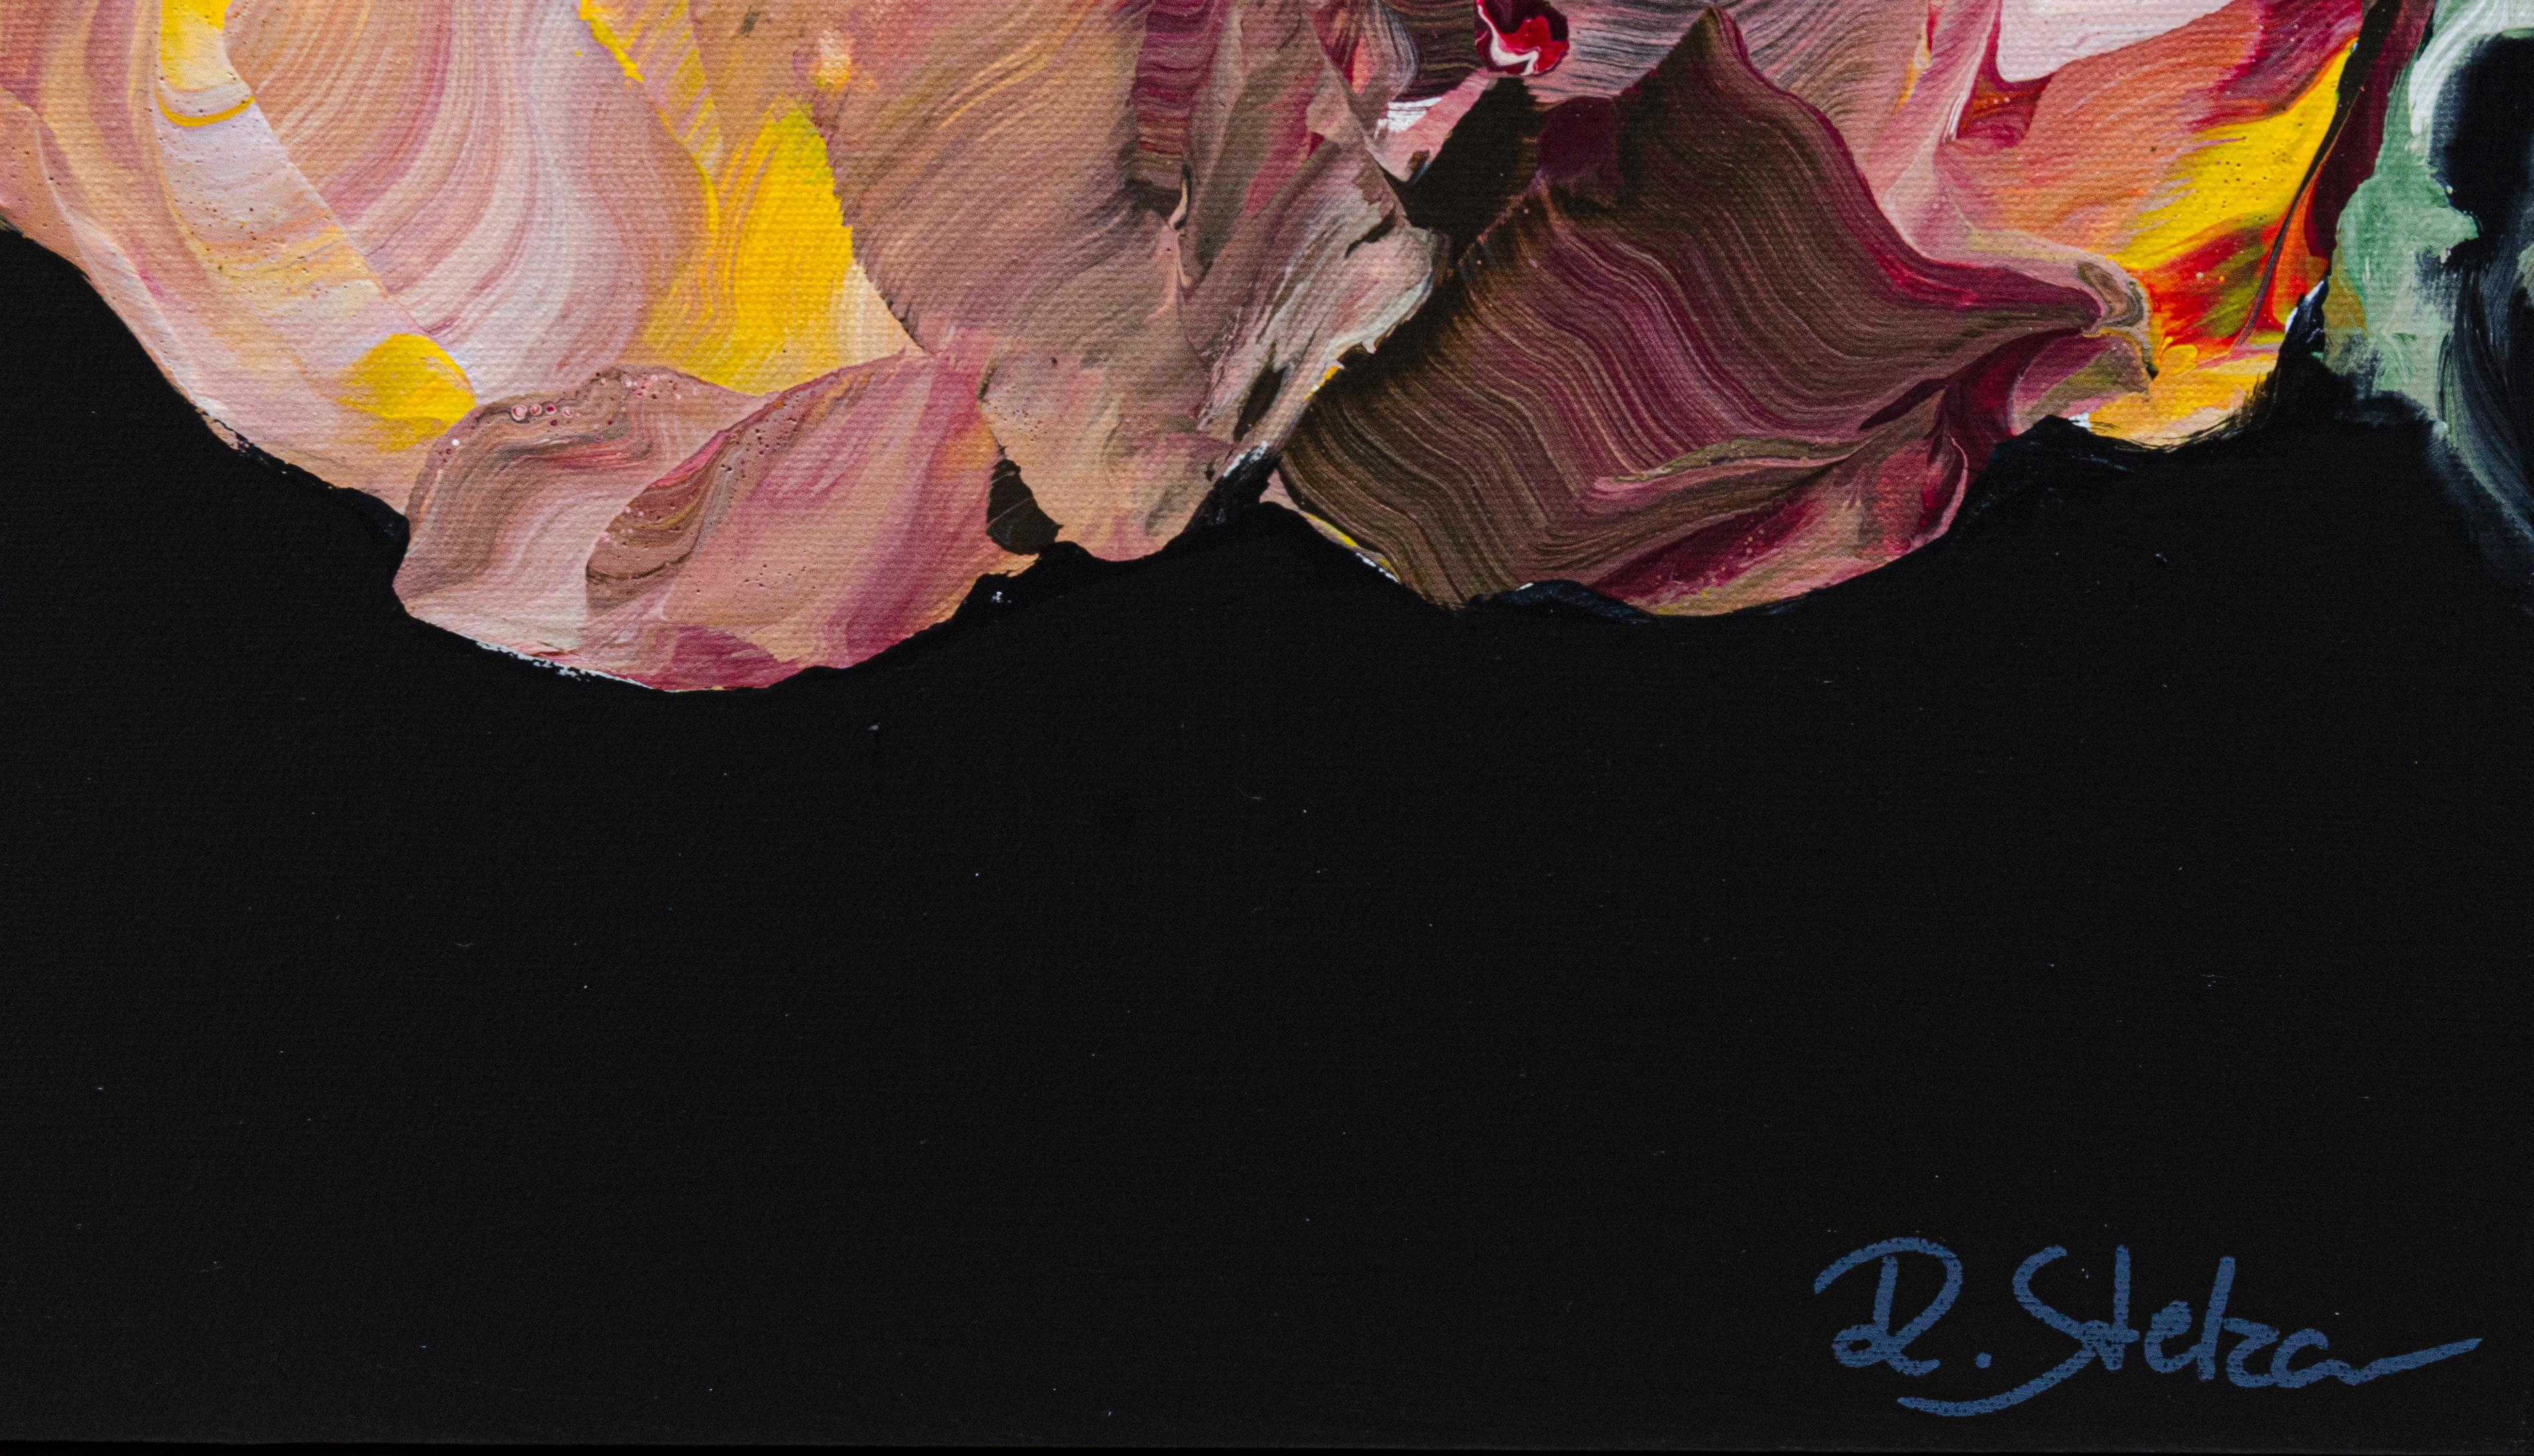 ABOUT THE PAINTING

In 'Wildly Kissed #1,' you'll find a striking contrast between the velvety black background and the roses that seem to defy the darkness with their unwavering spirit. They stand as a symbol of resilience, facing the natural